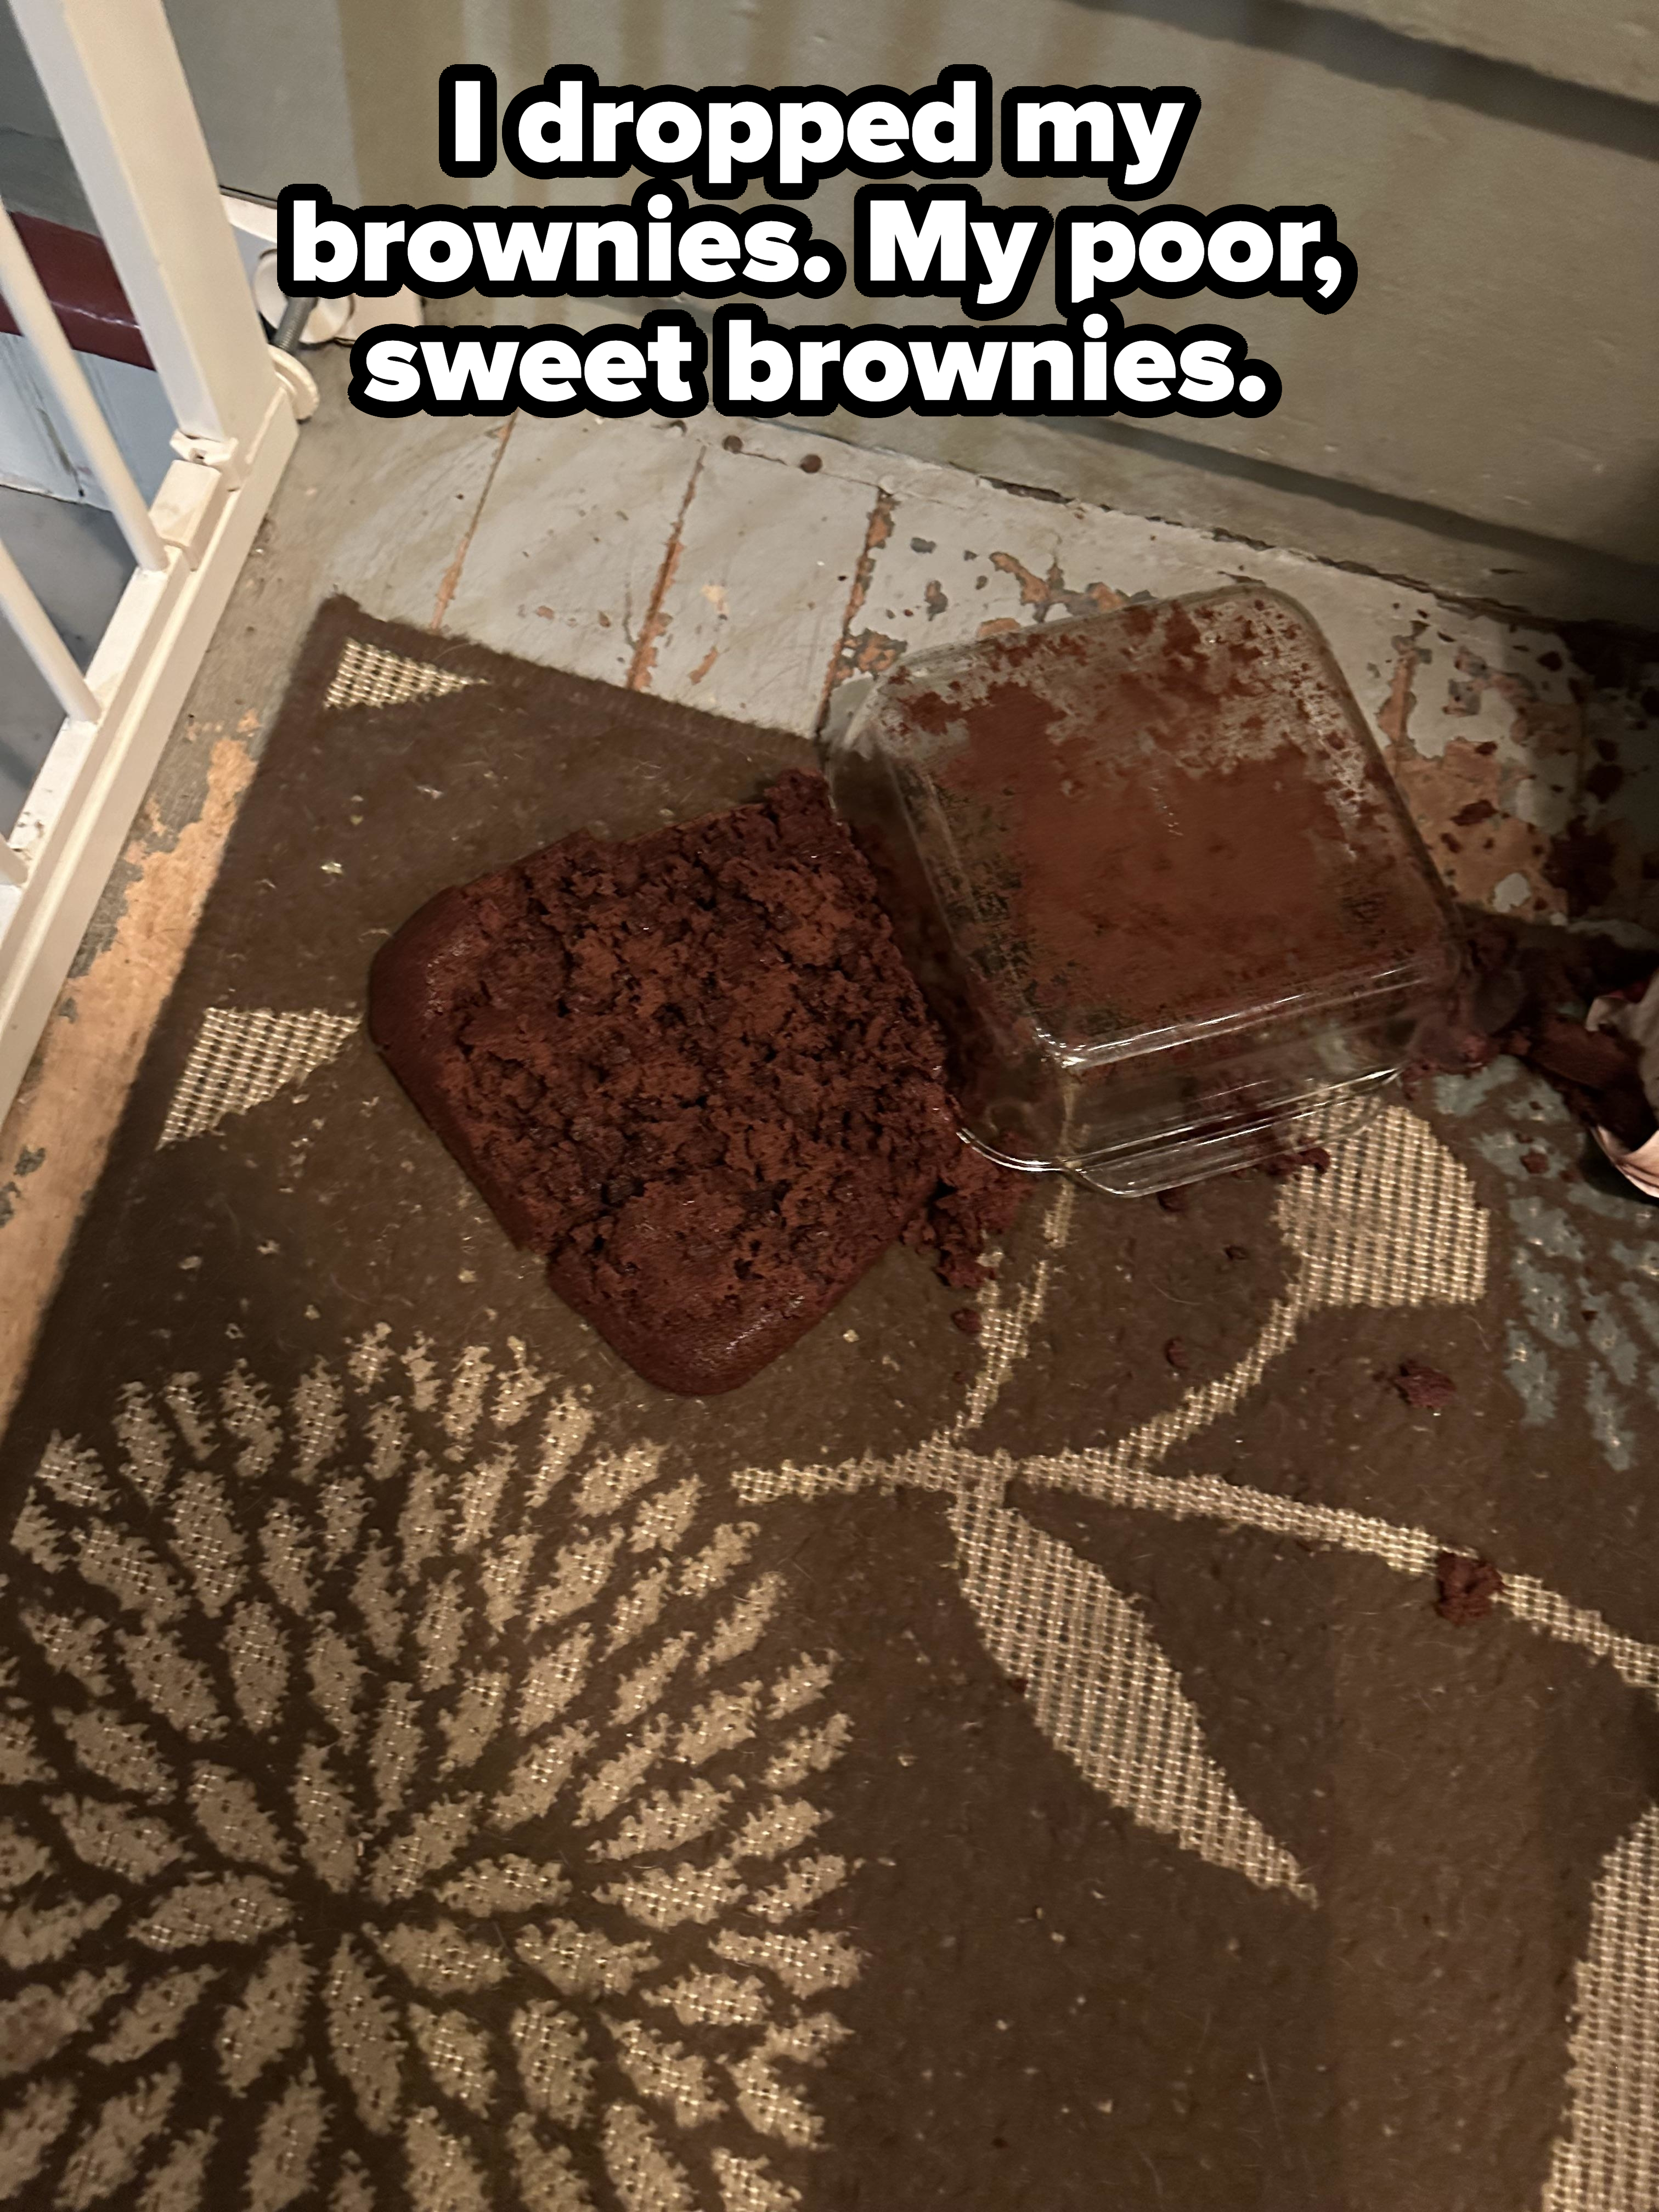 Overturned pan with spilled brownies on a patterned doormat, near a house door